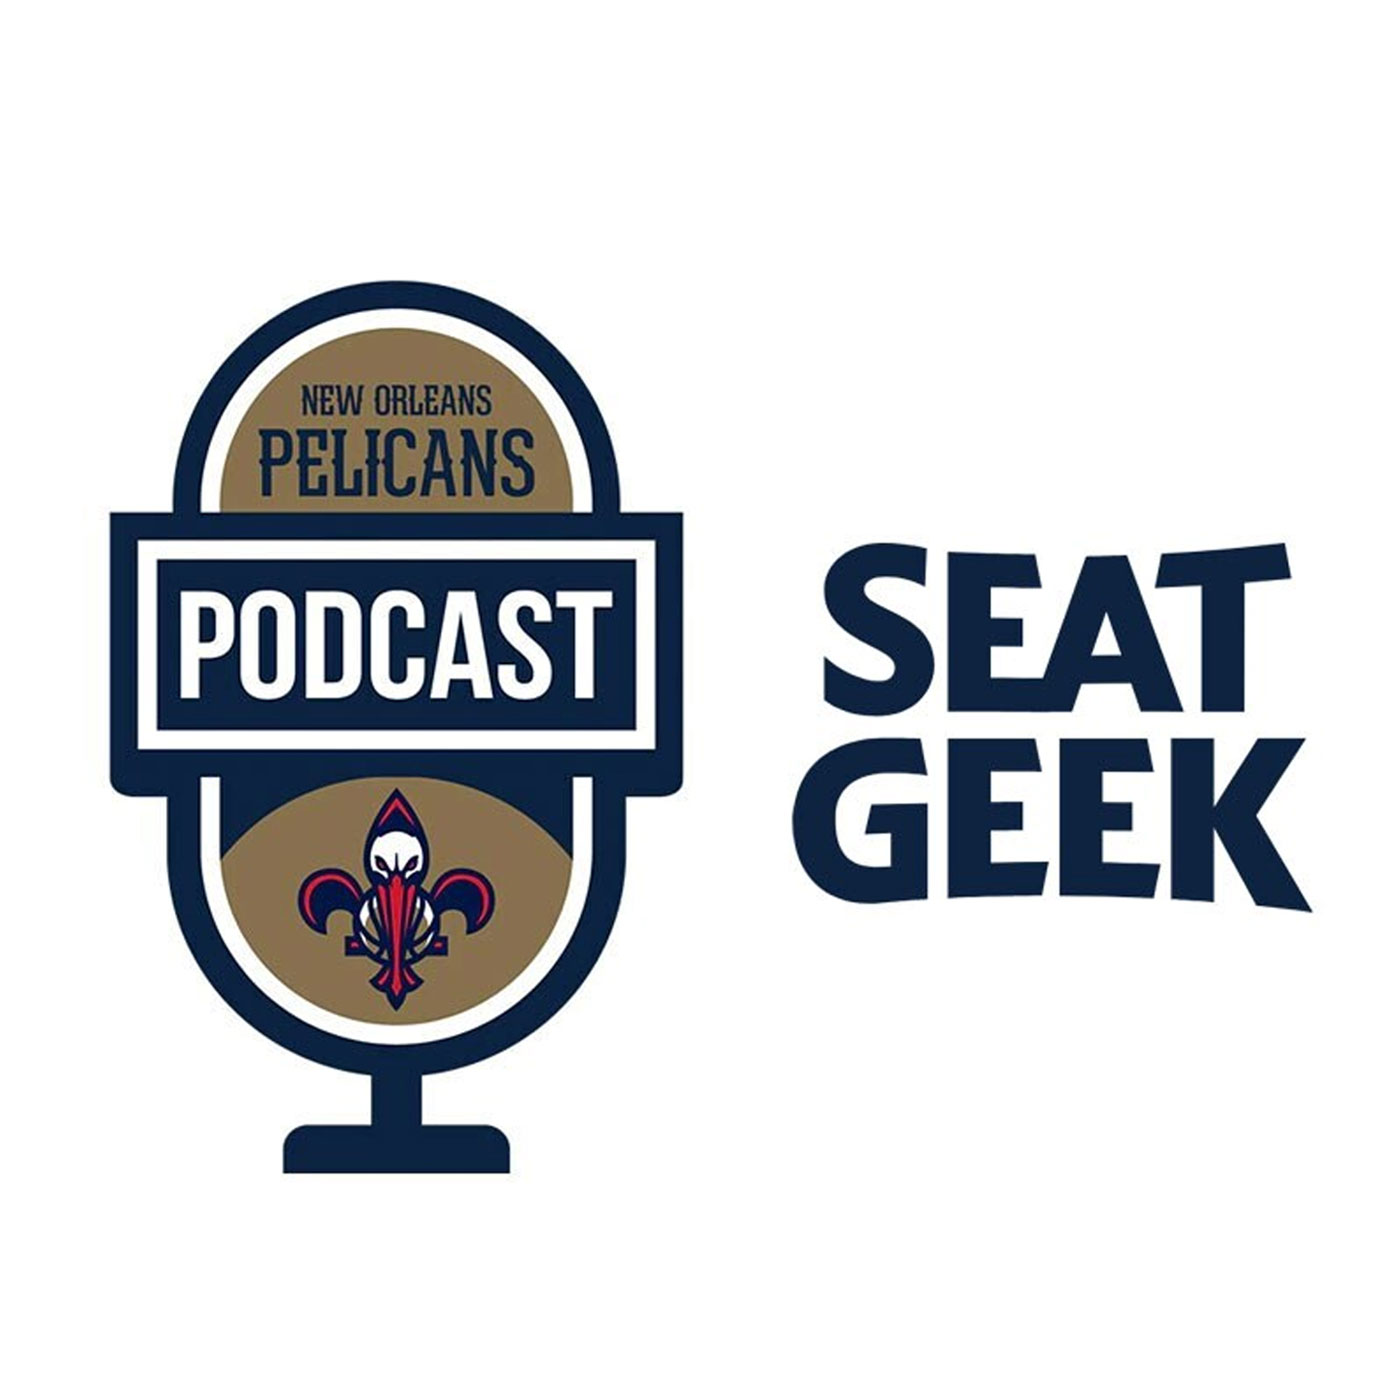 Marc Kestecher and Molly Kimball on the New Orleans Pelicans podcast presented by Seatgeek - March 24, 2021